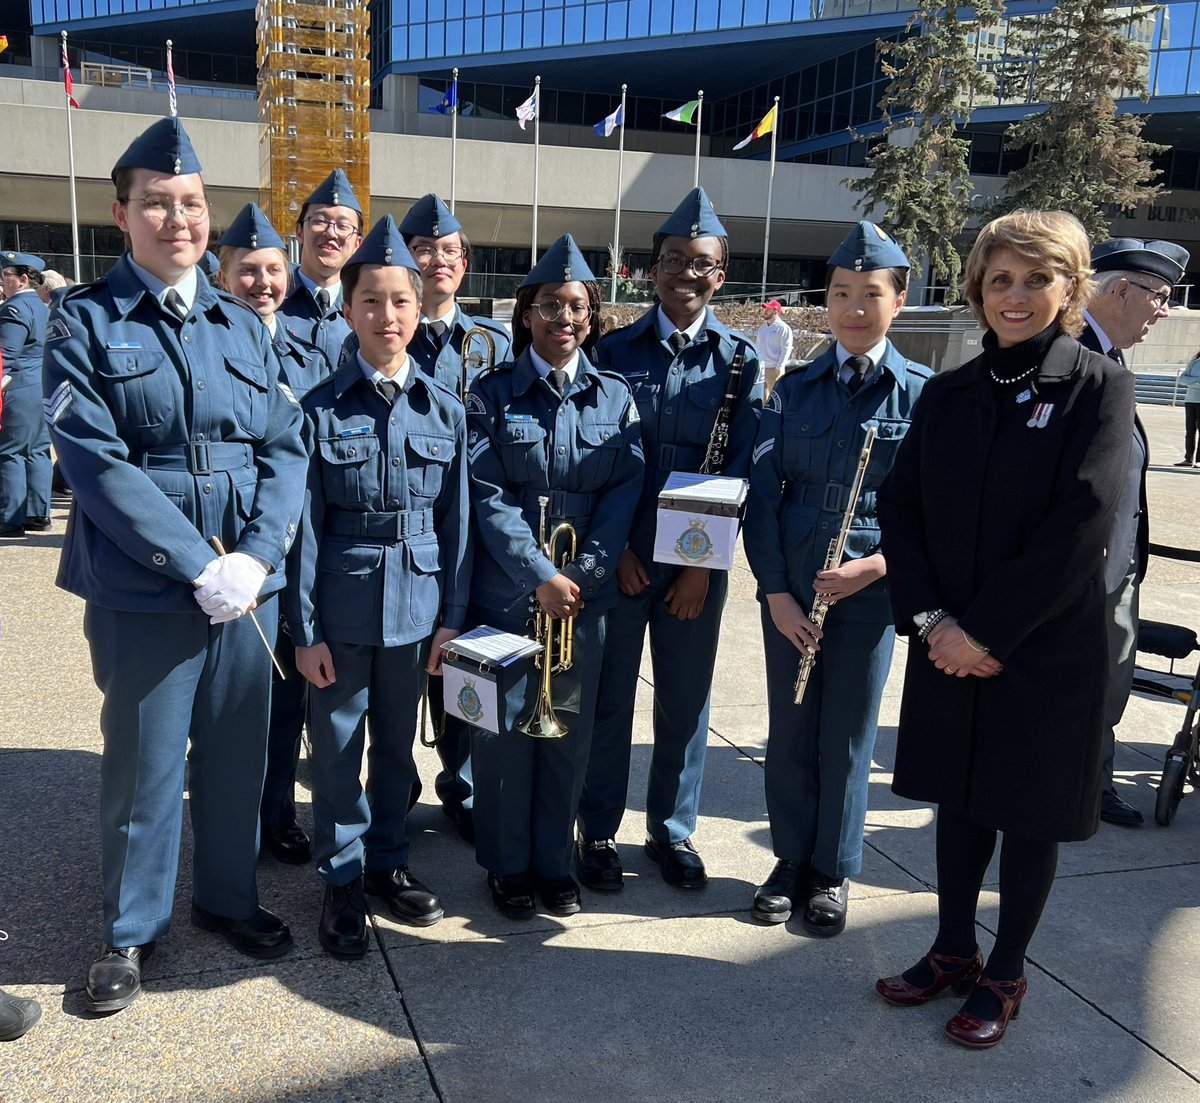 Today, we honour 100 years of the Royal Canadian Air Force!  Calgary has a rich history deeply intertwined with military aviation. It was amazing to celebrate past and present military members who have made an indelible mark on our city and country. #RCAF100